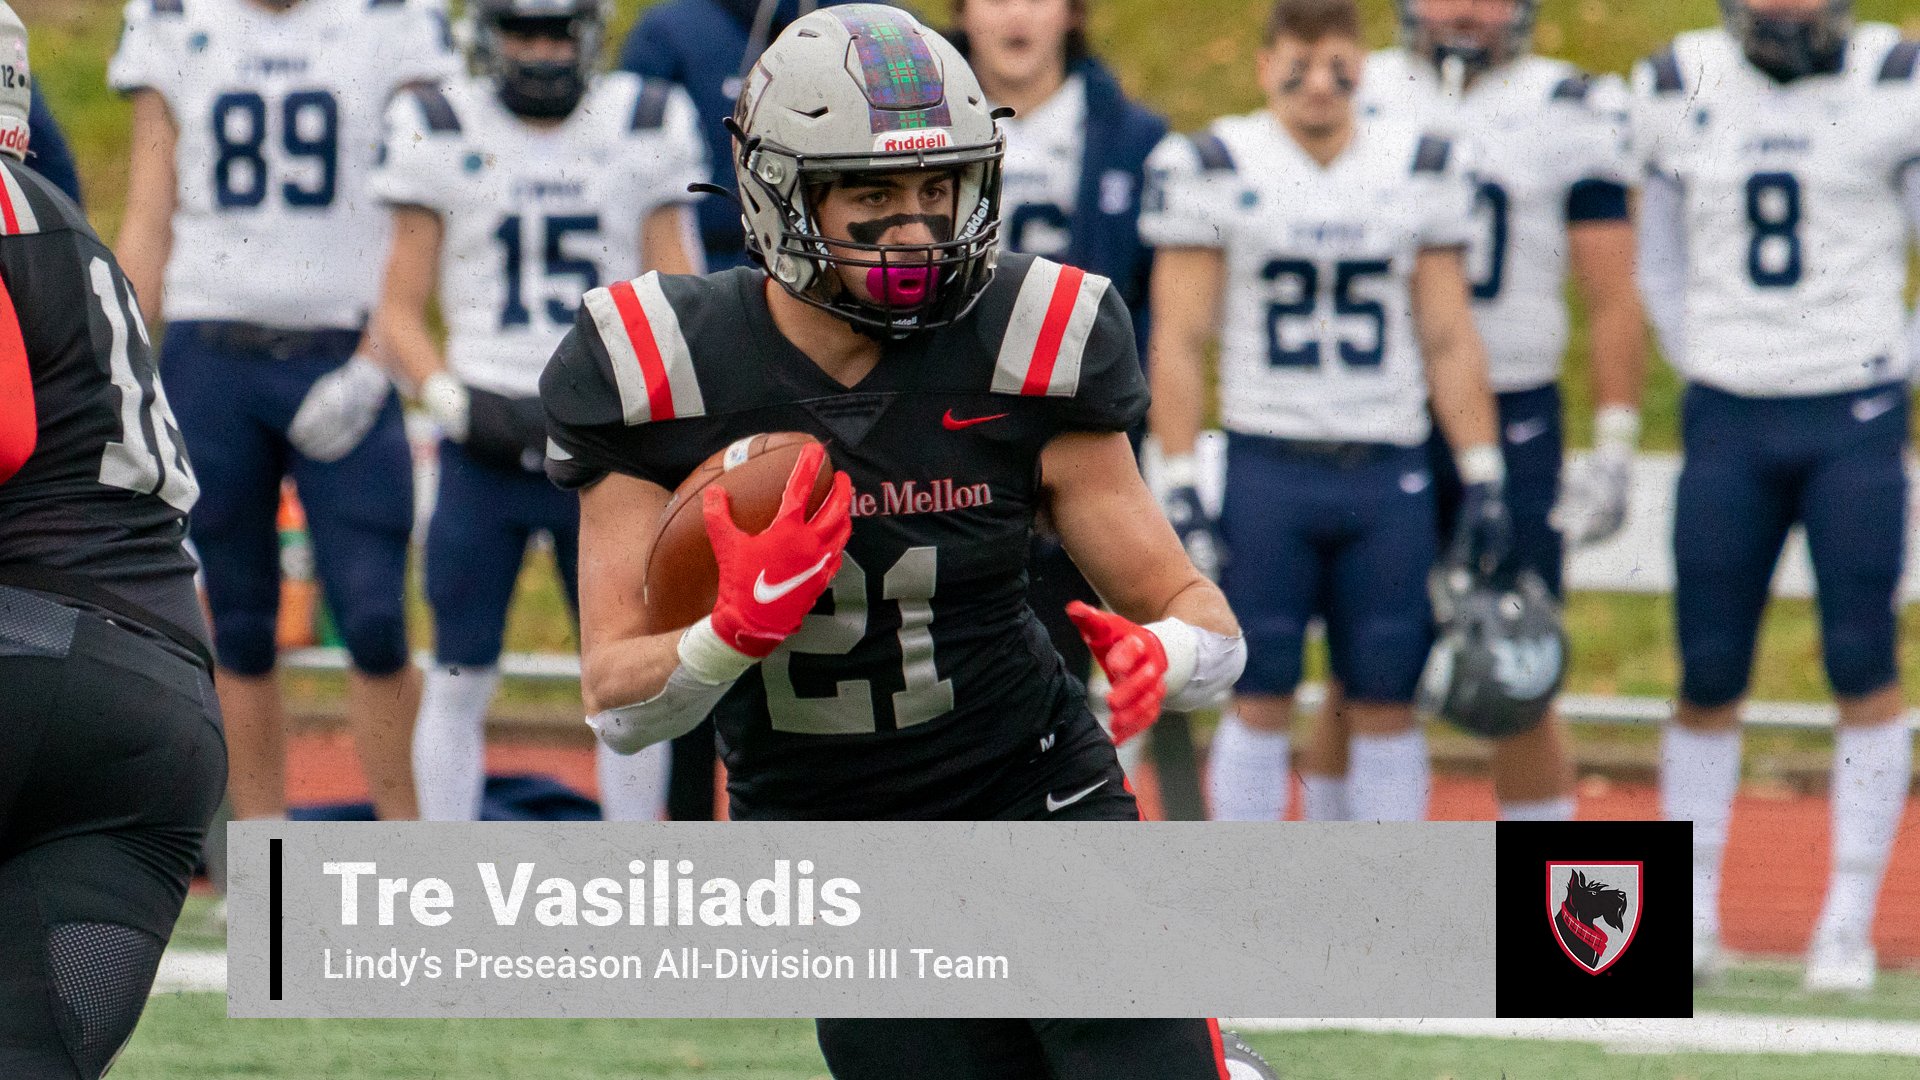 Vasiliadis Receives Second Preseason Accolade, Named to Lindy’s All-Division III Team